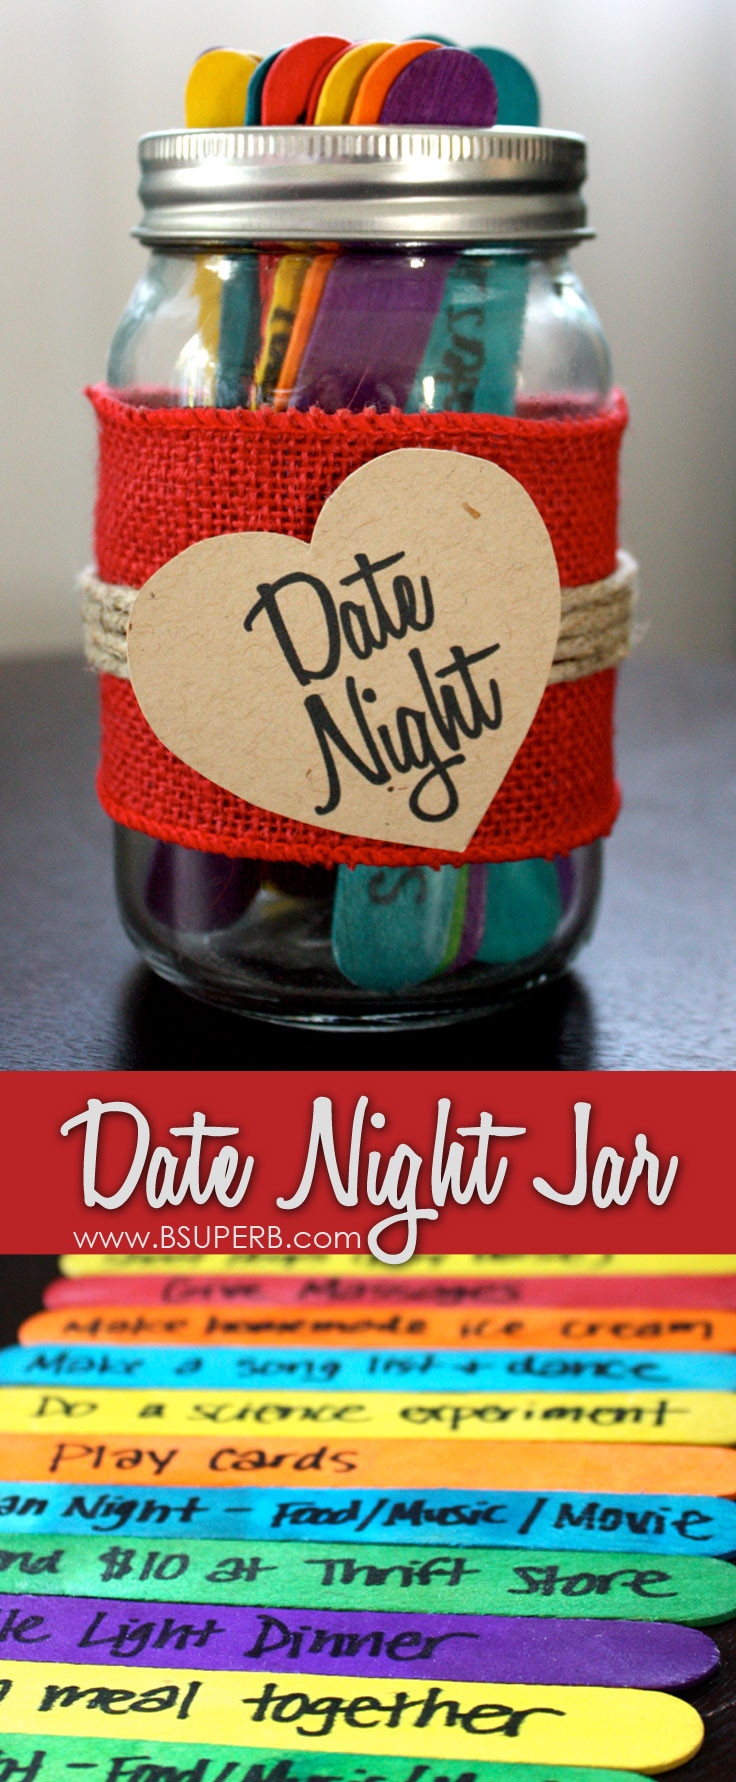 Date Night Gift Ideas For Couples
 The top 20 Ideas About Date Night Gift Ideas for Couples